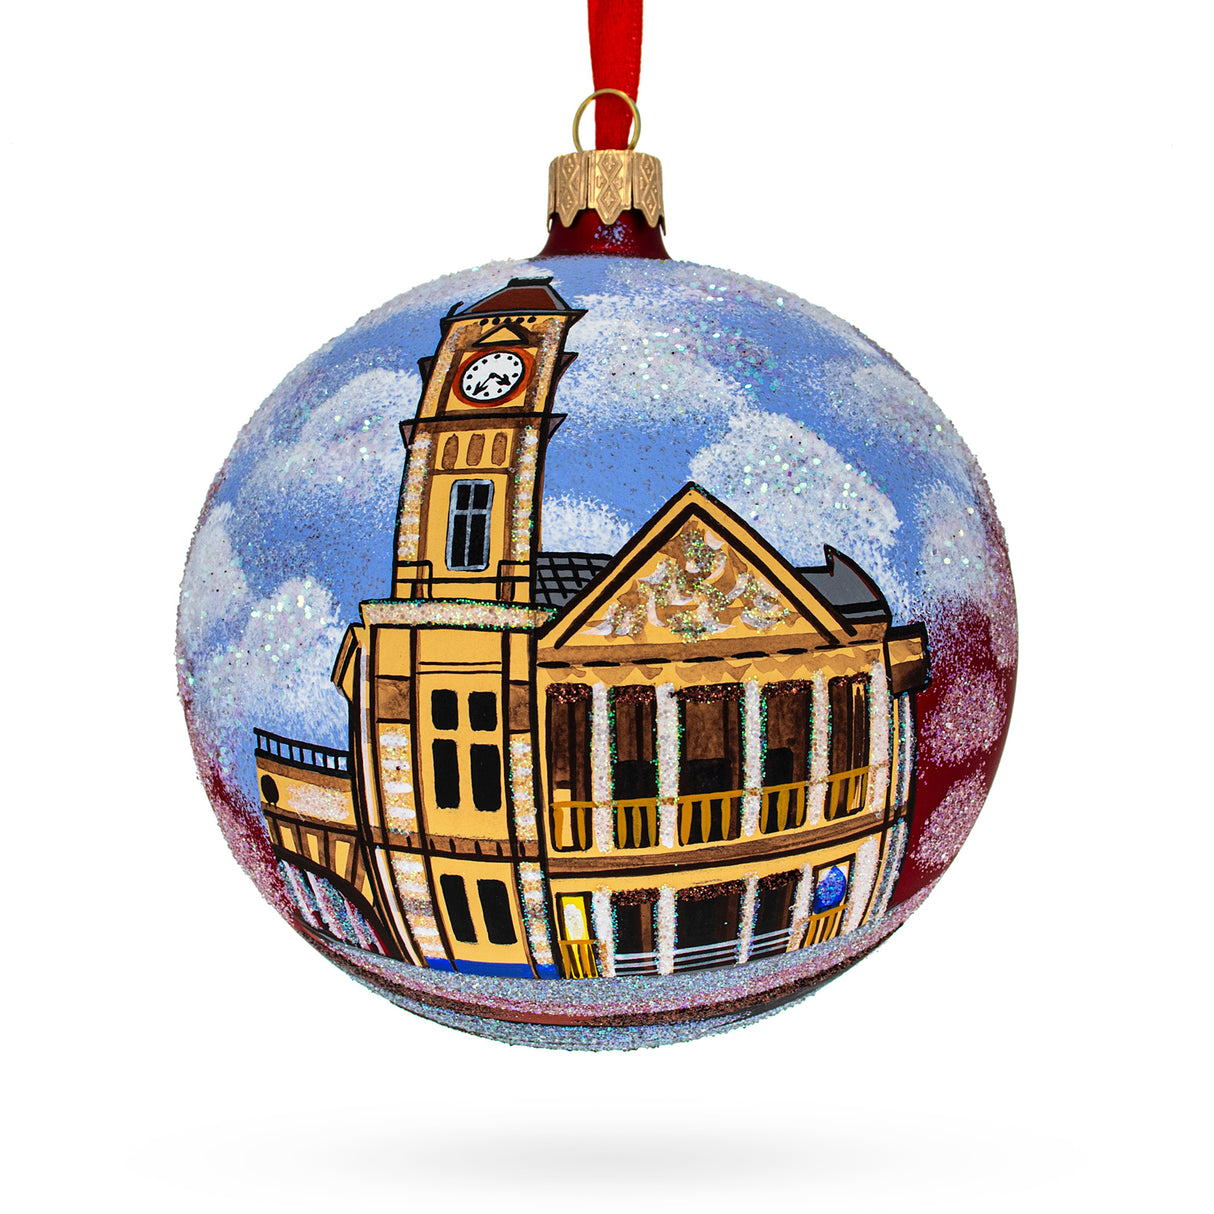 Birmingham Museum & Art Gallery, United Kingdom Glass Ball Christmas Ornament 4 Inches in Multi color, Round shape